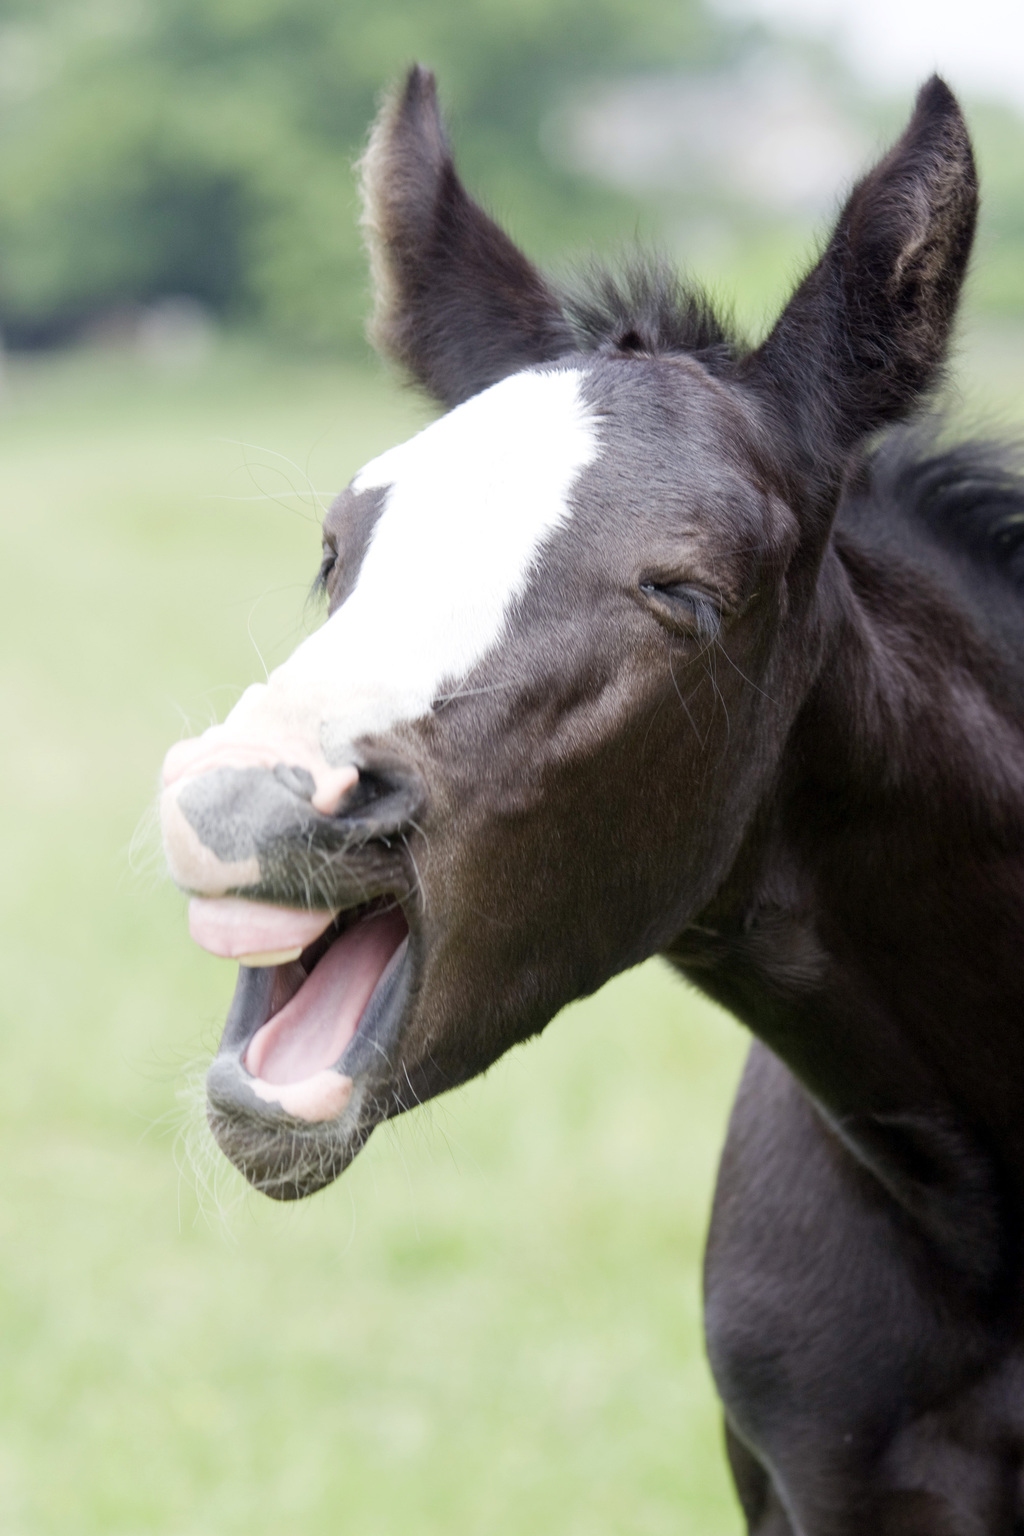 Aging a Horse by Its Teeth | EquiMed - Horse Health Matters